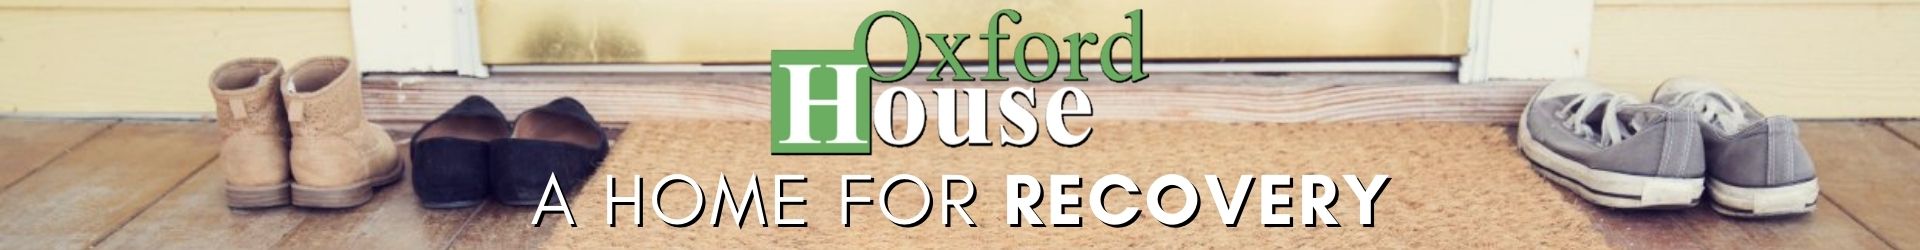 Oxford House Ad